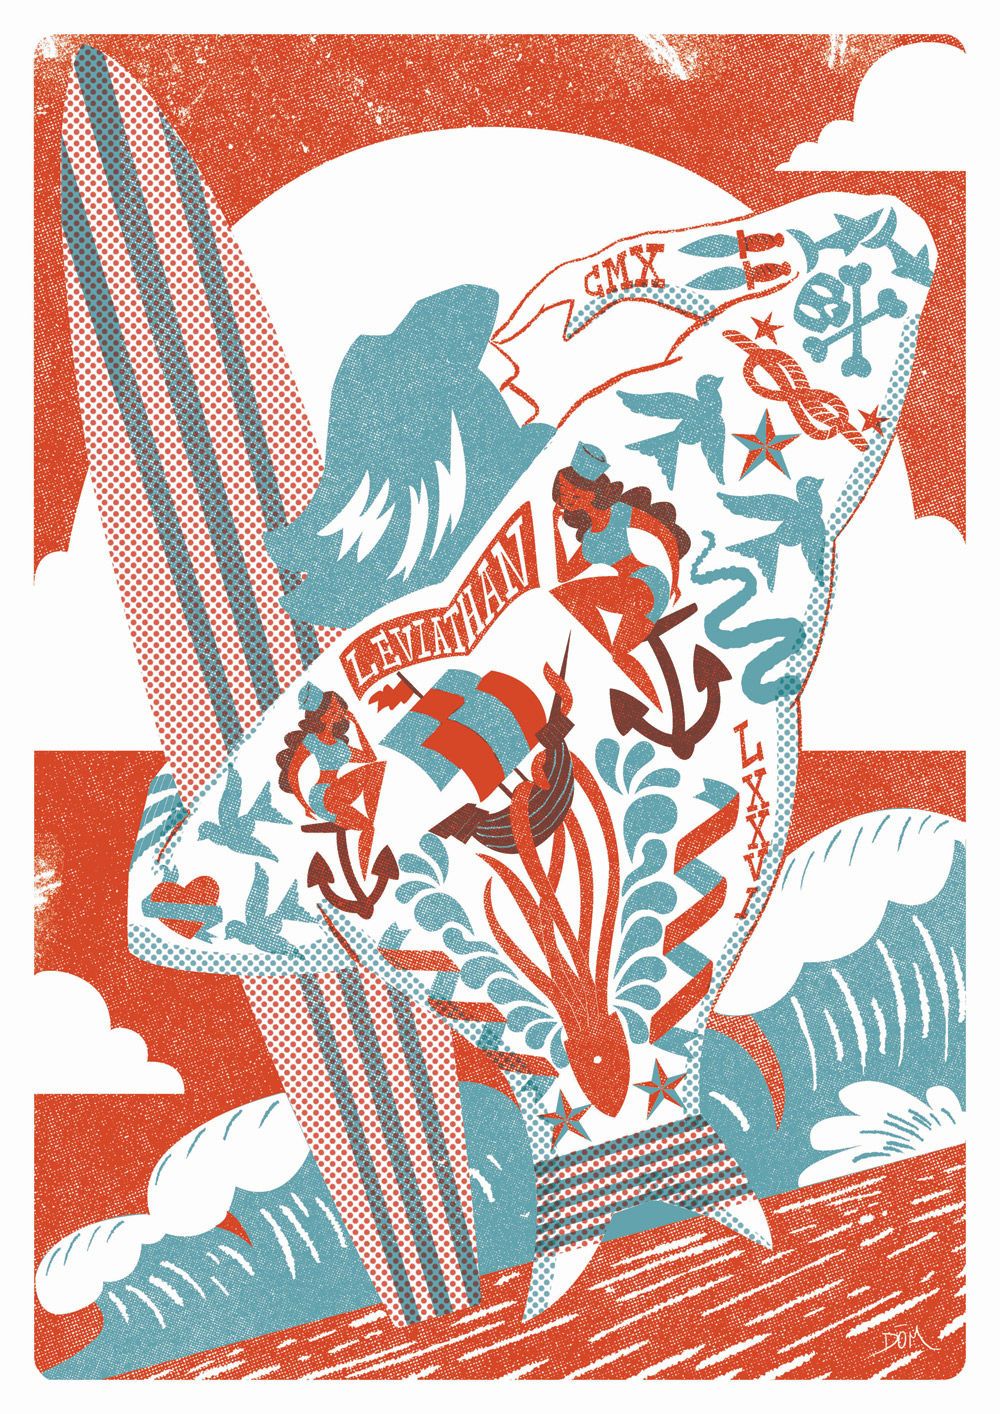  Limited edition screen print for Damn Fine Print and Sure Shots Film Festival, Ireland. 